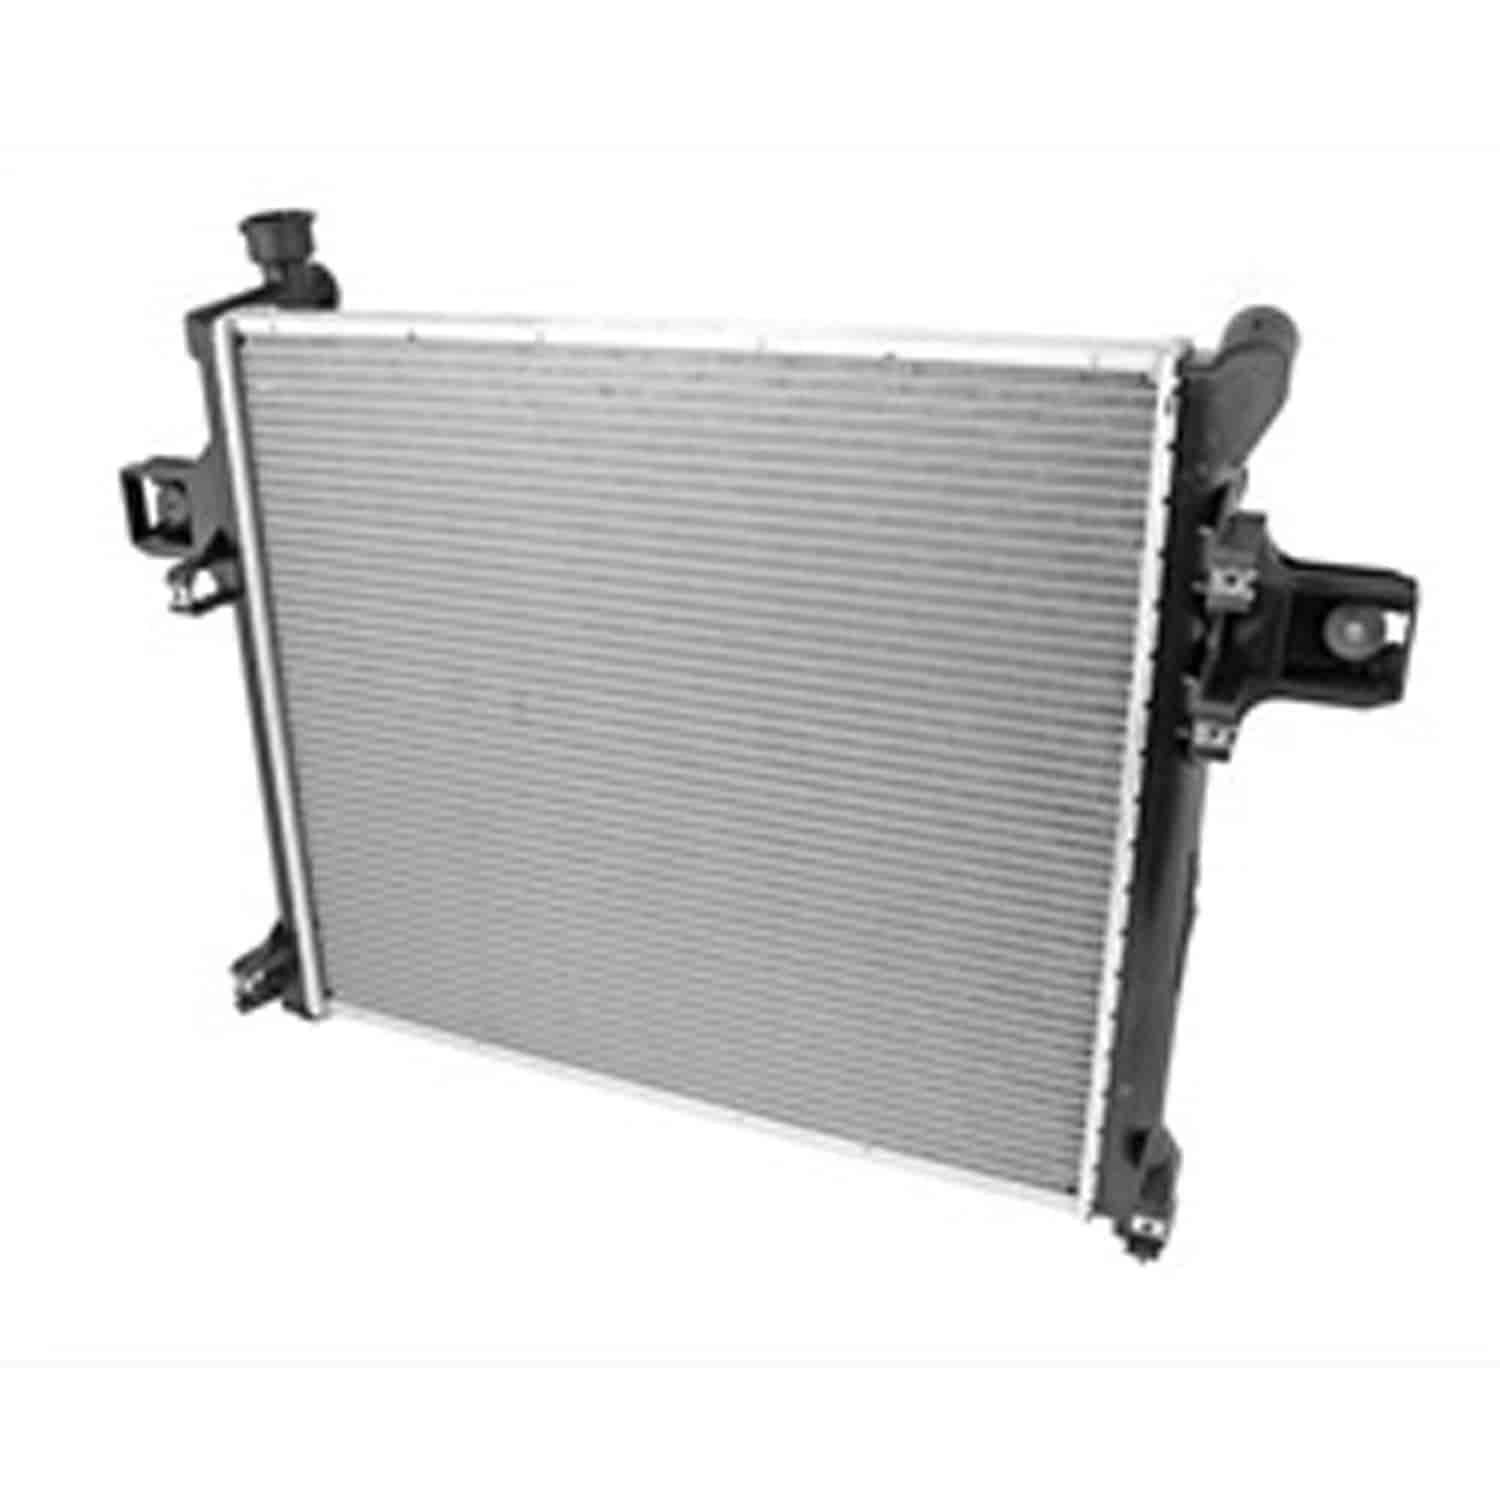 This 1 row radiator from Omix-ADA fits 05-09 Jeep Grand Cherokee WK with a 5.7L engine.